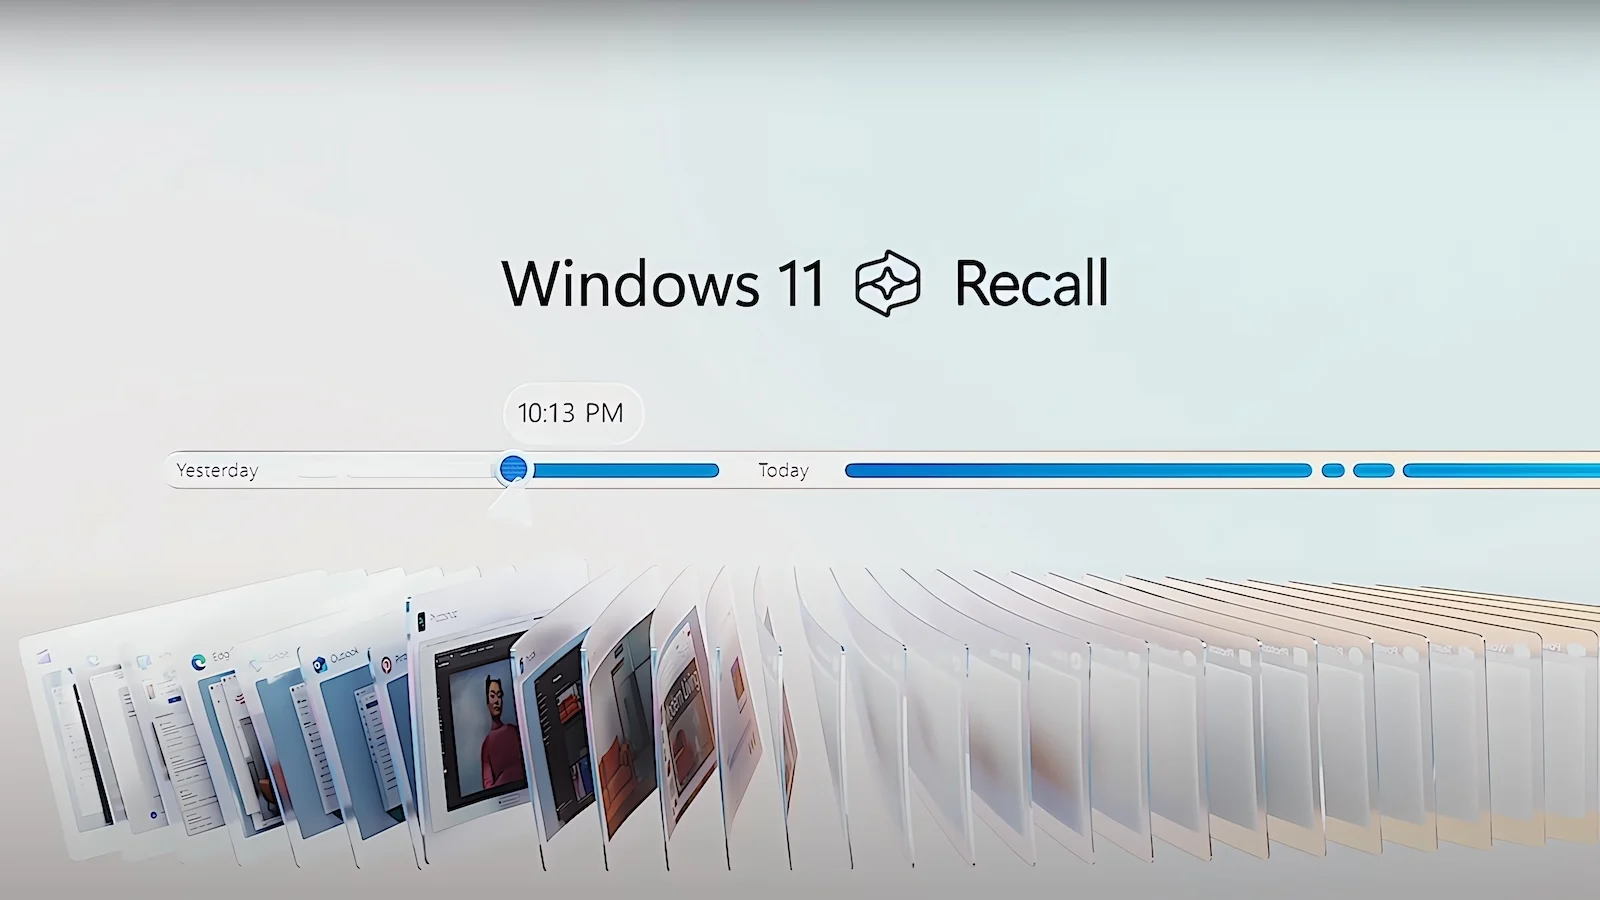 Meet Windows 11's Latest Update: How the New Recall Feature Transforms Your Old PC